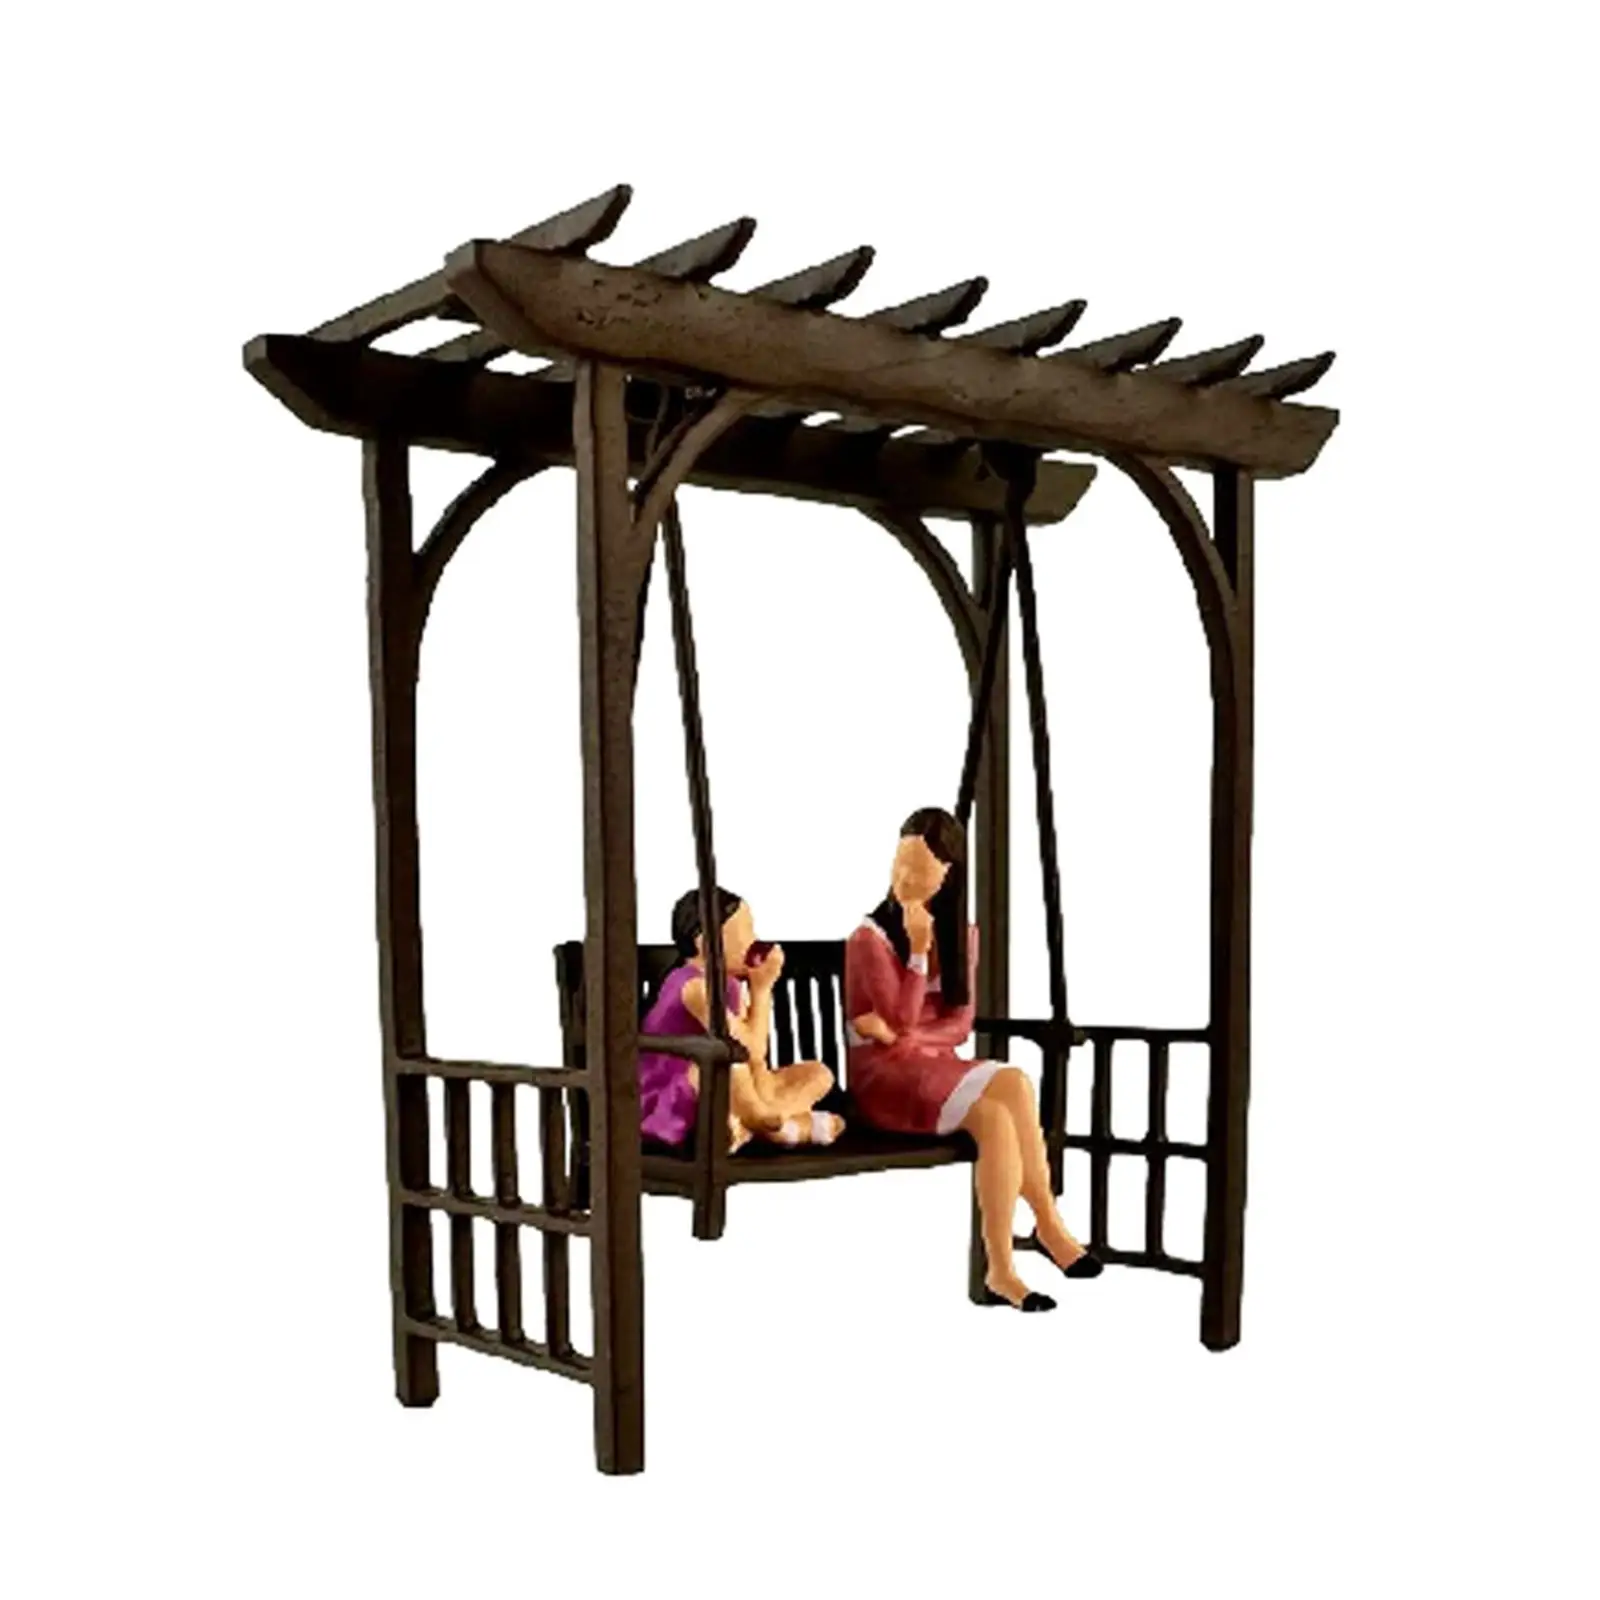 Miniature Playground Equipment Scenery Accessories Ornament Mini Entertainment Facilities DIY Projects Accessory Diorama Layout